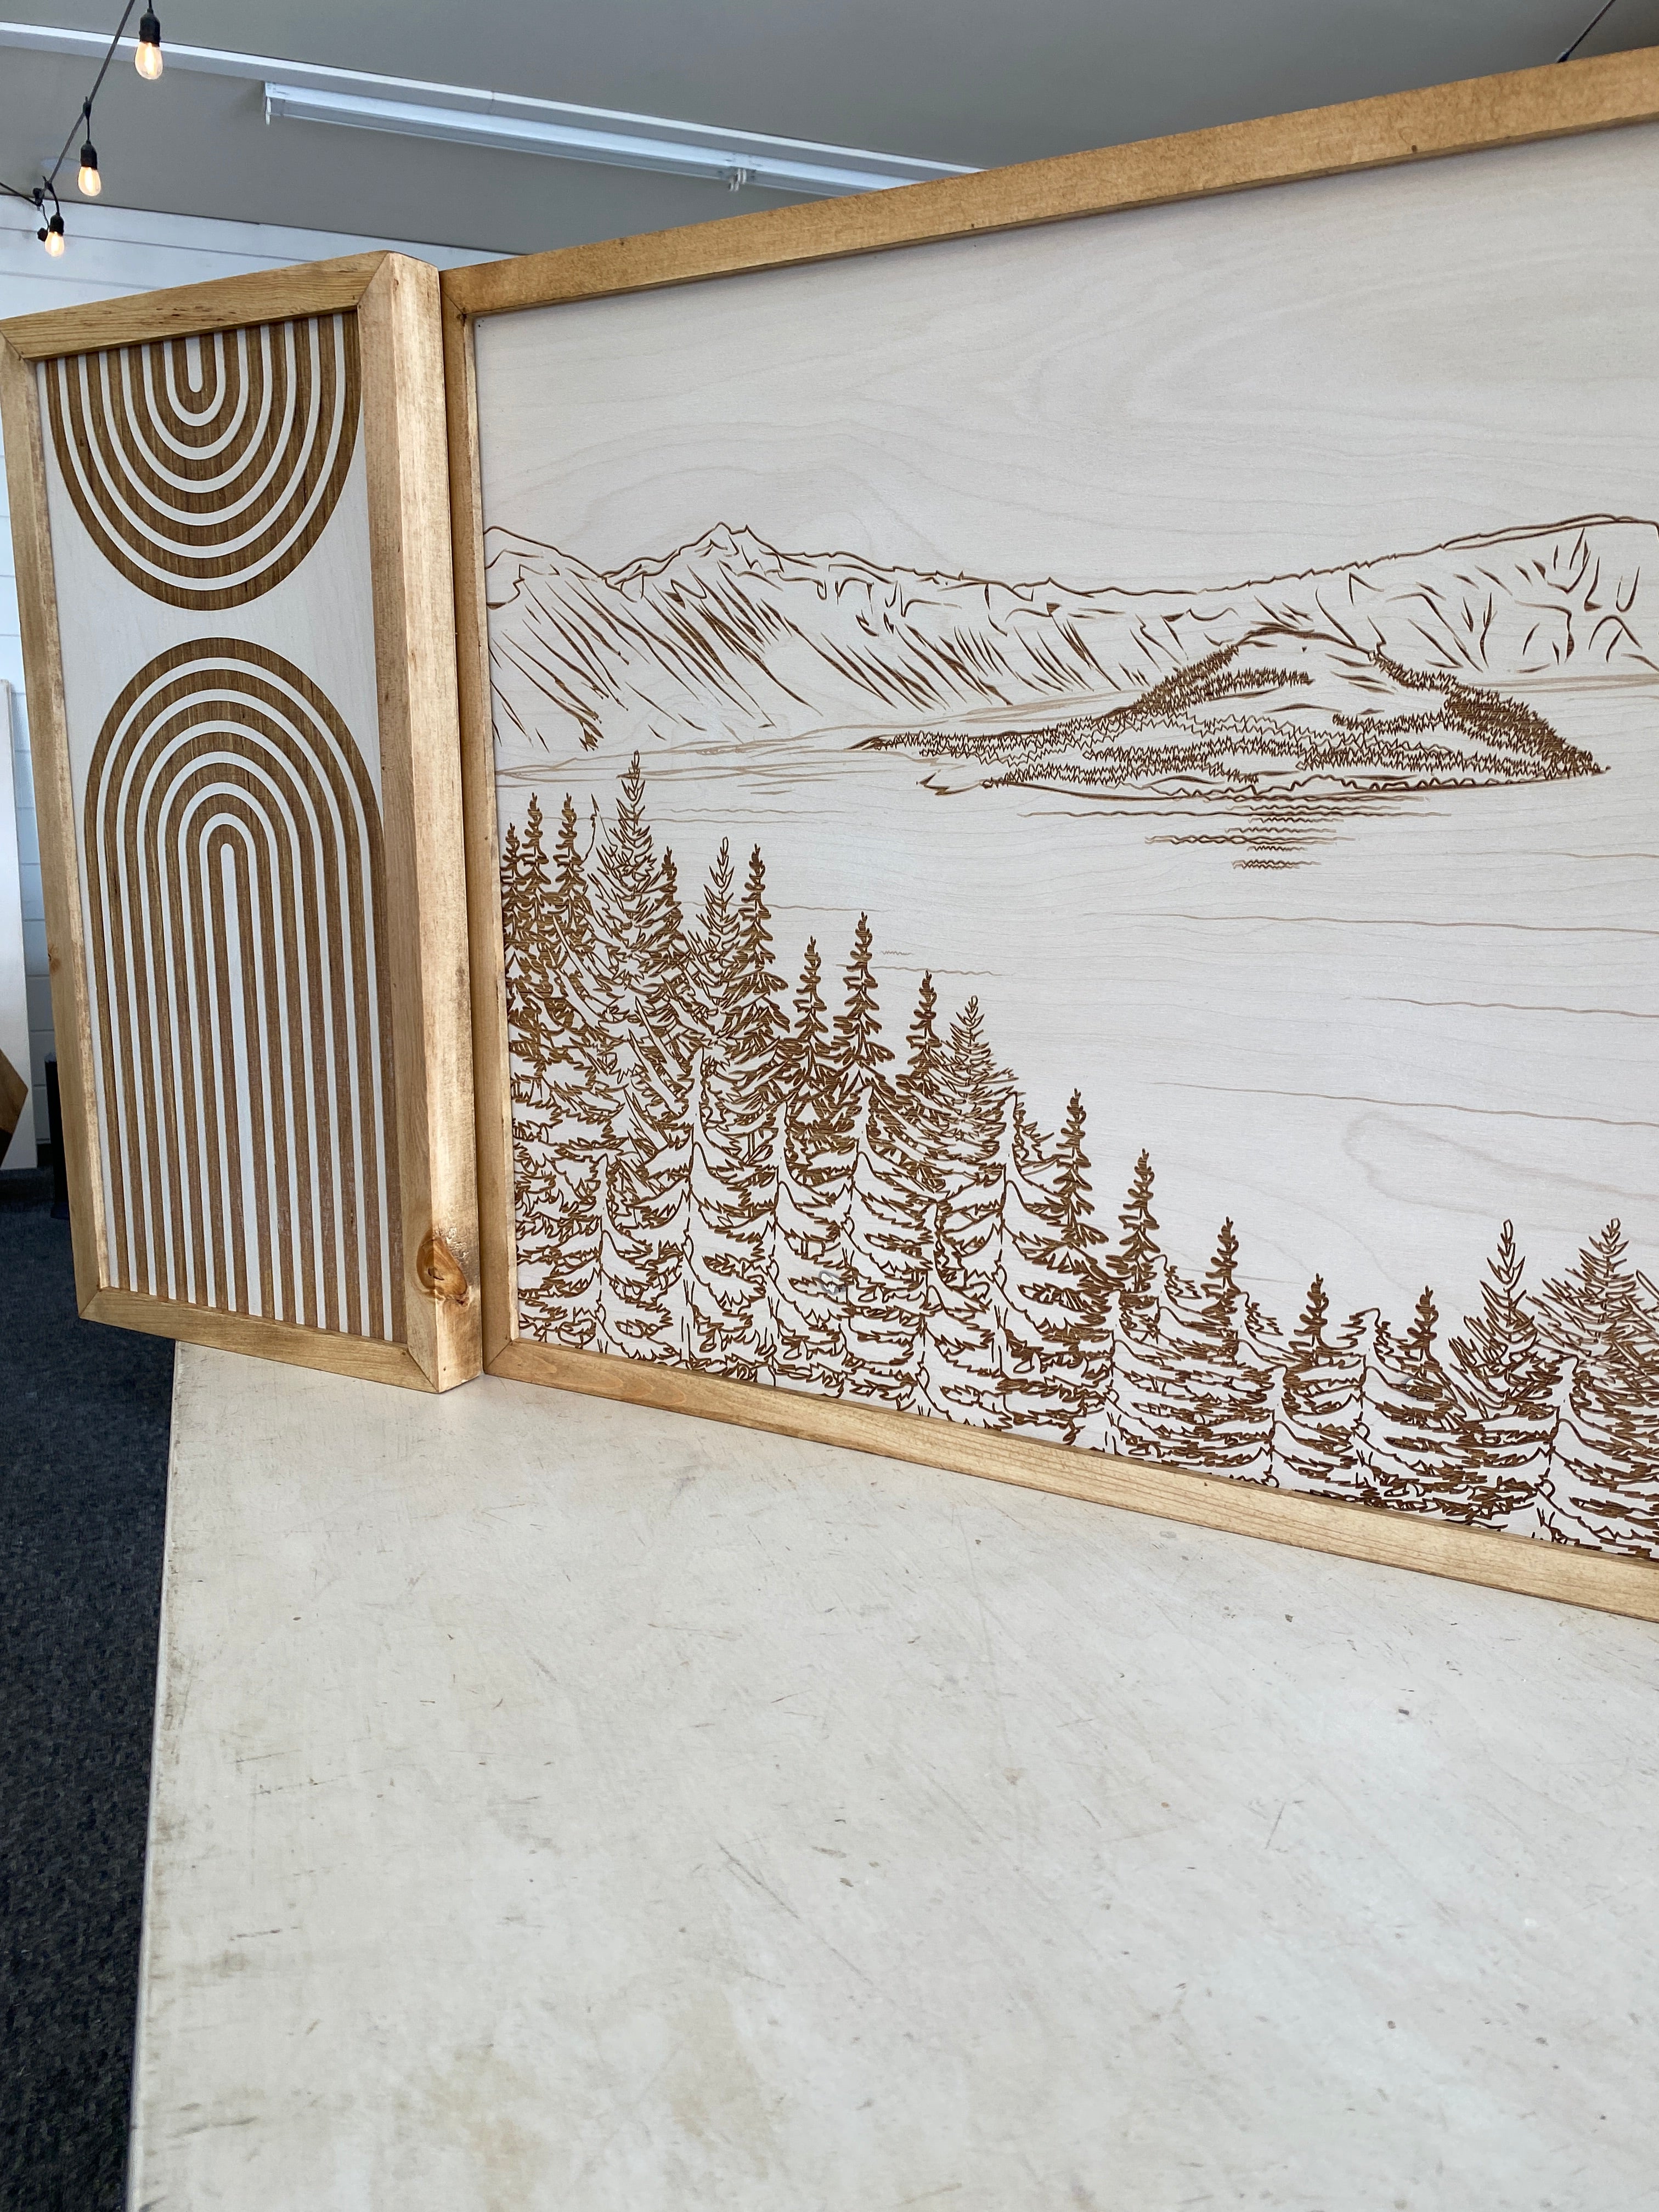 3 Piece Hand Sketched Crater Lake Wood Artwork with Boho